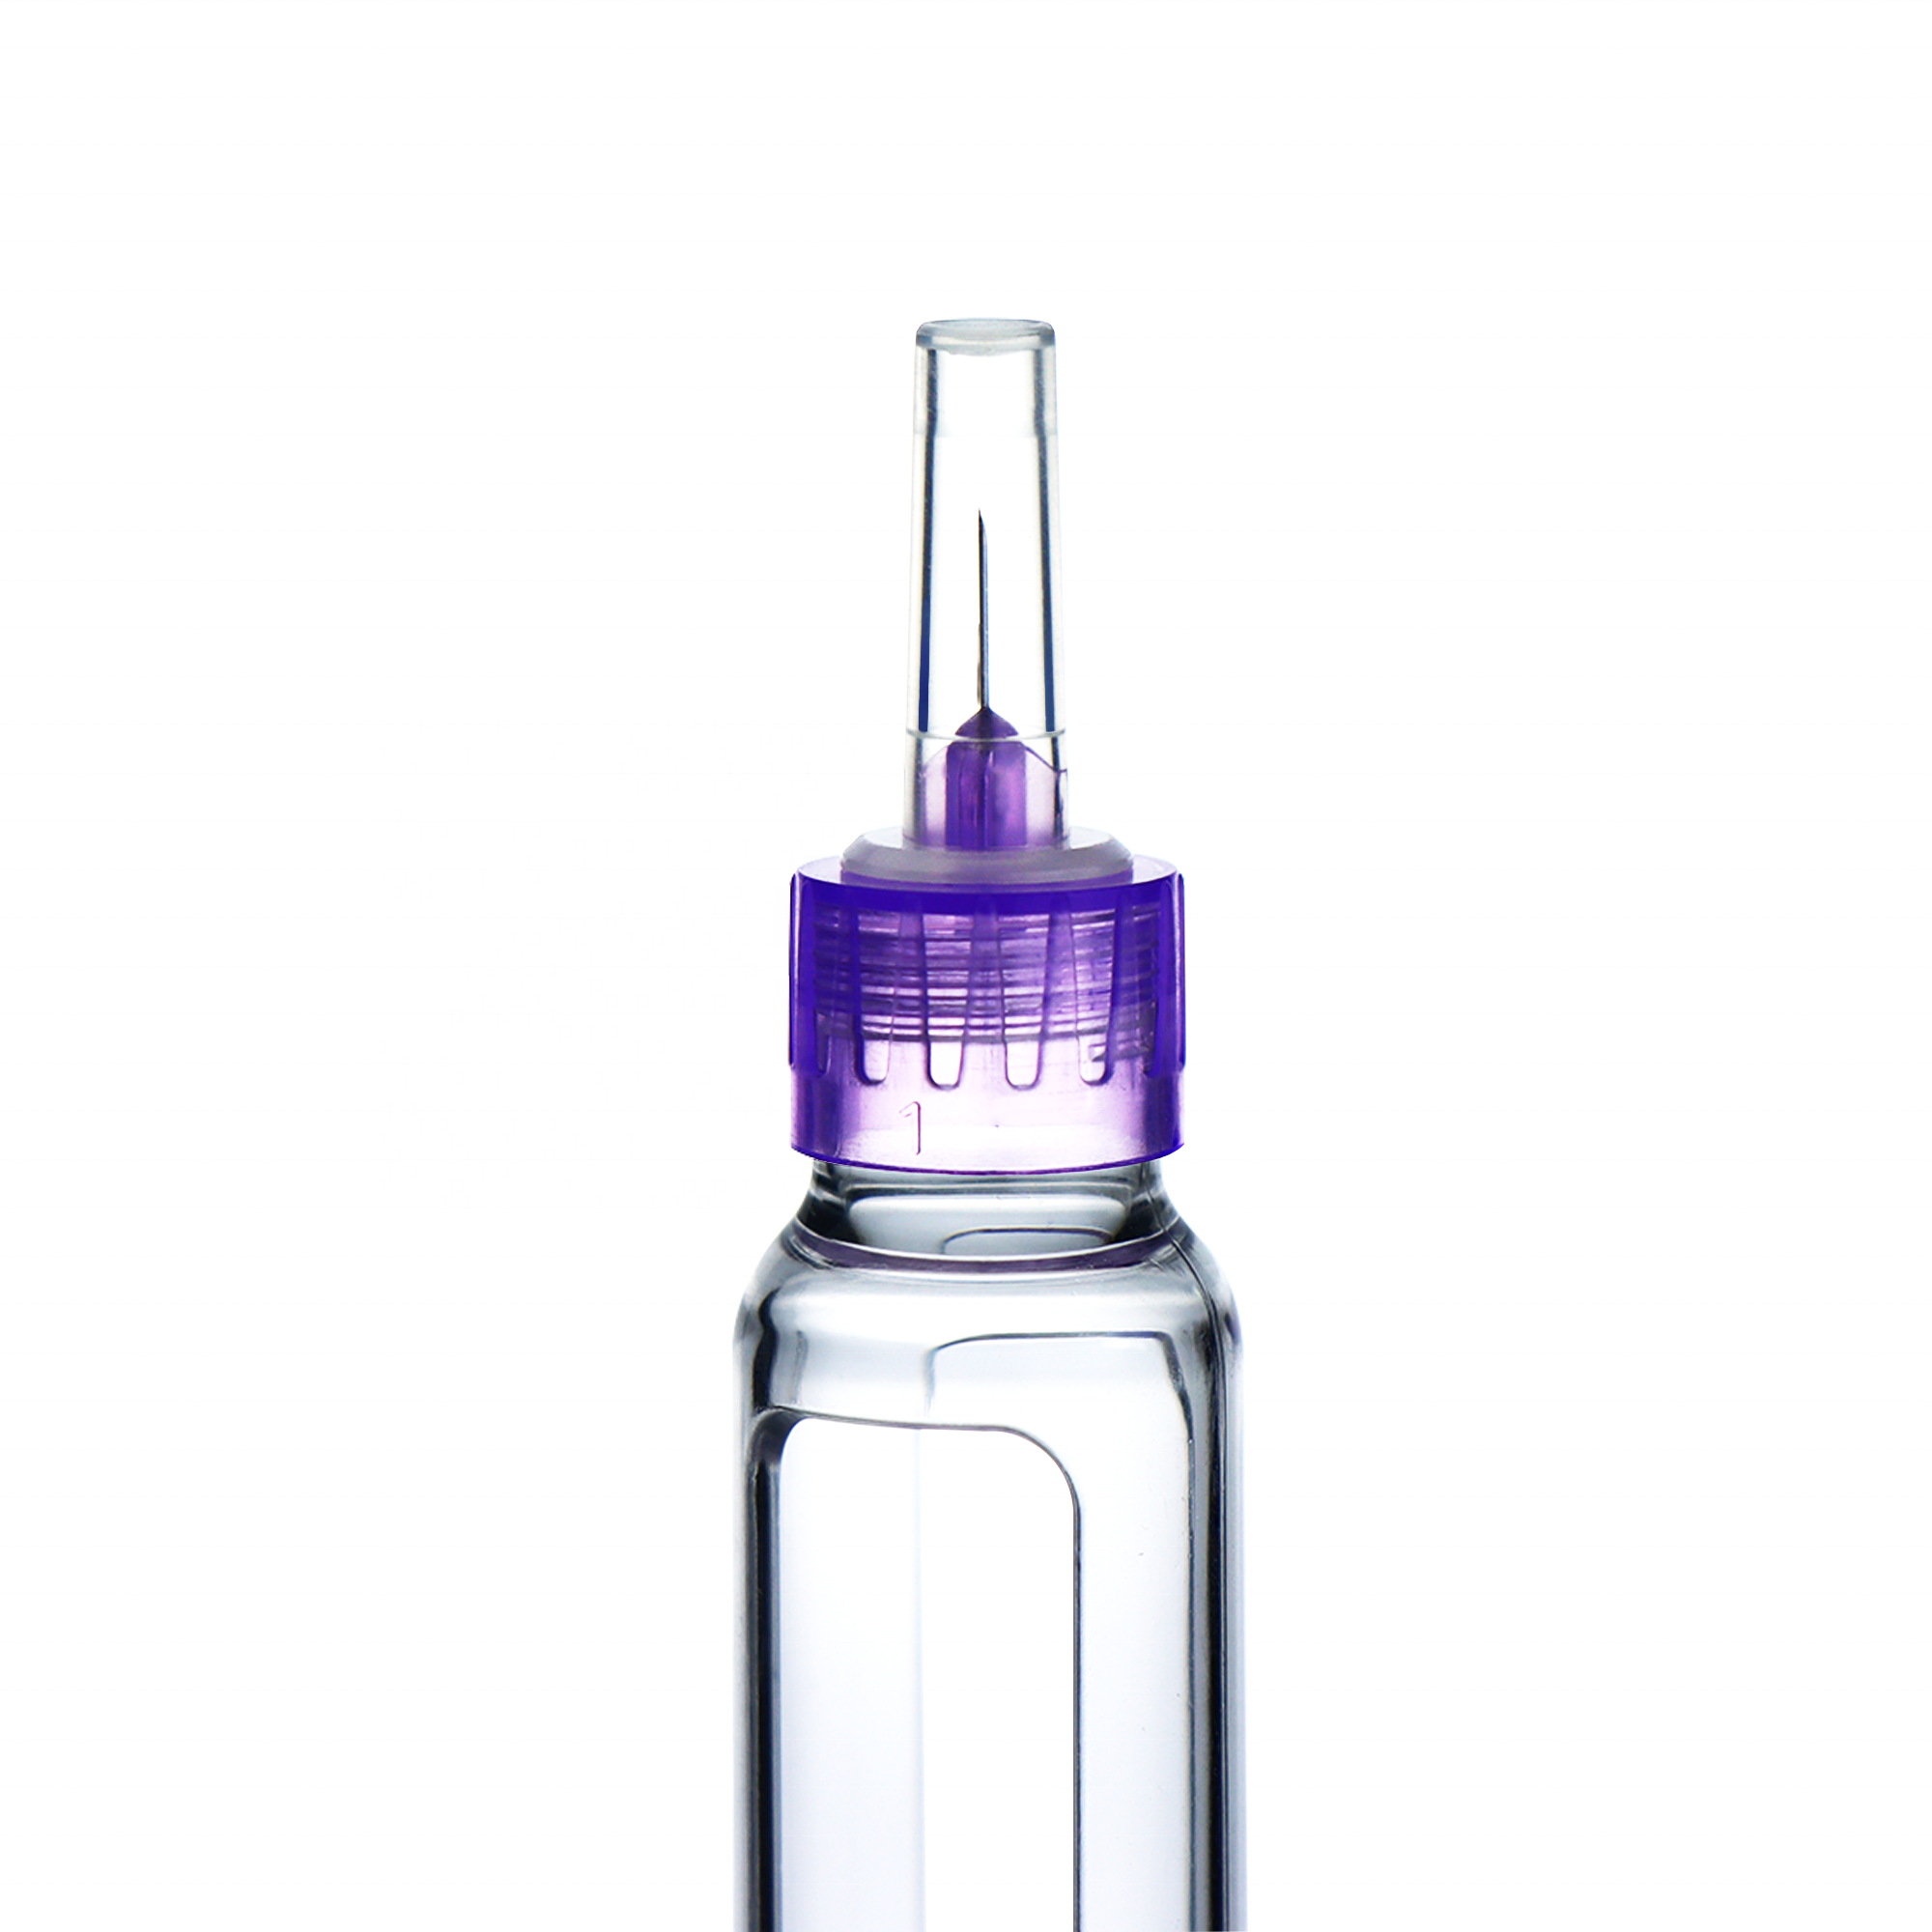 Sterile Pen Needle For Insulin Injection